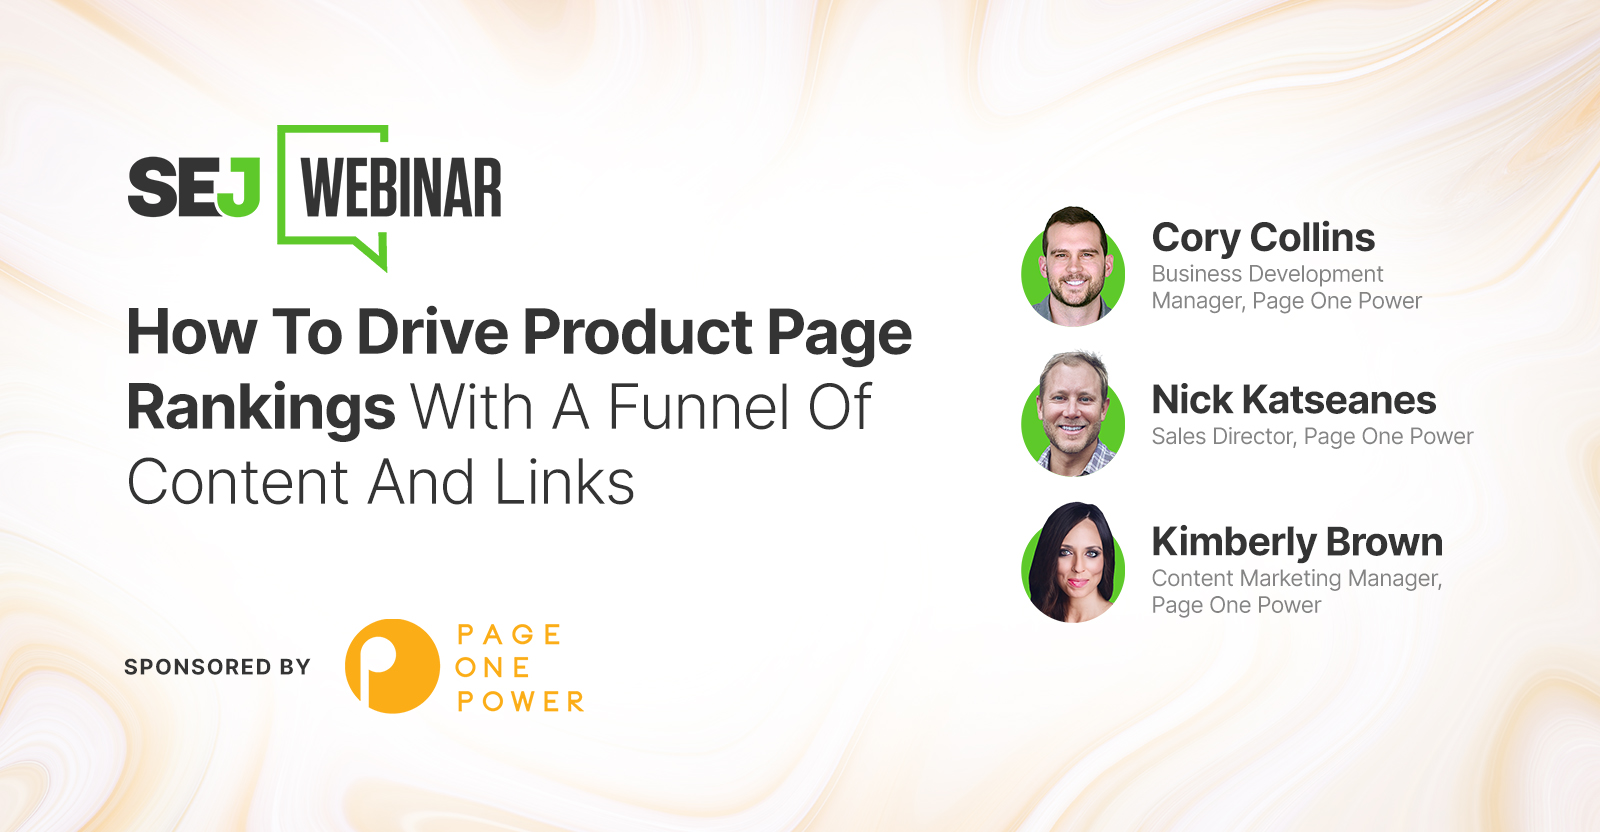 How To Drive Product Page Rankings With A Funnel Of Content & Links